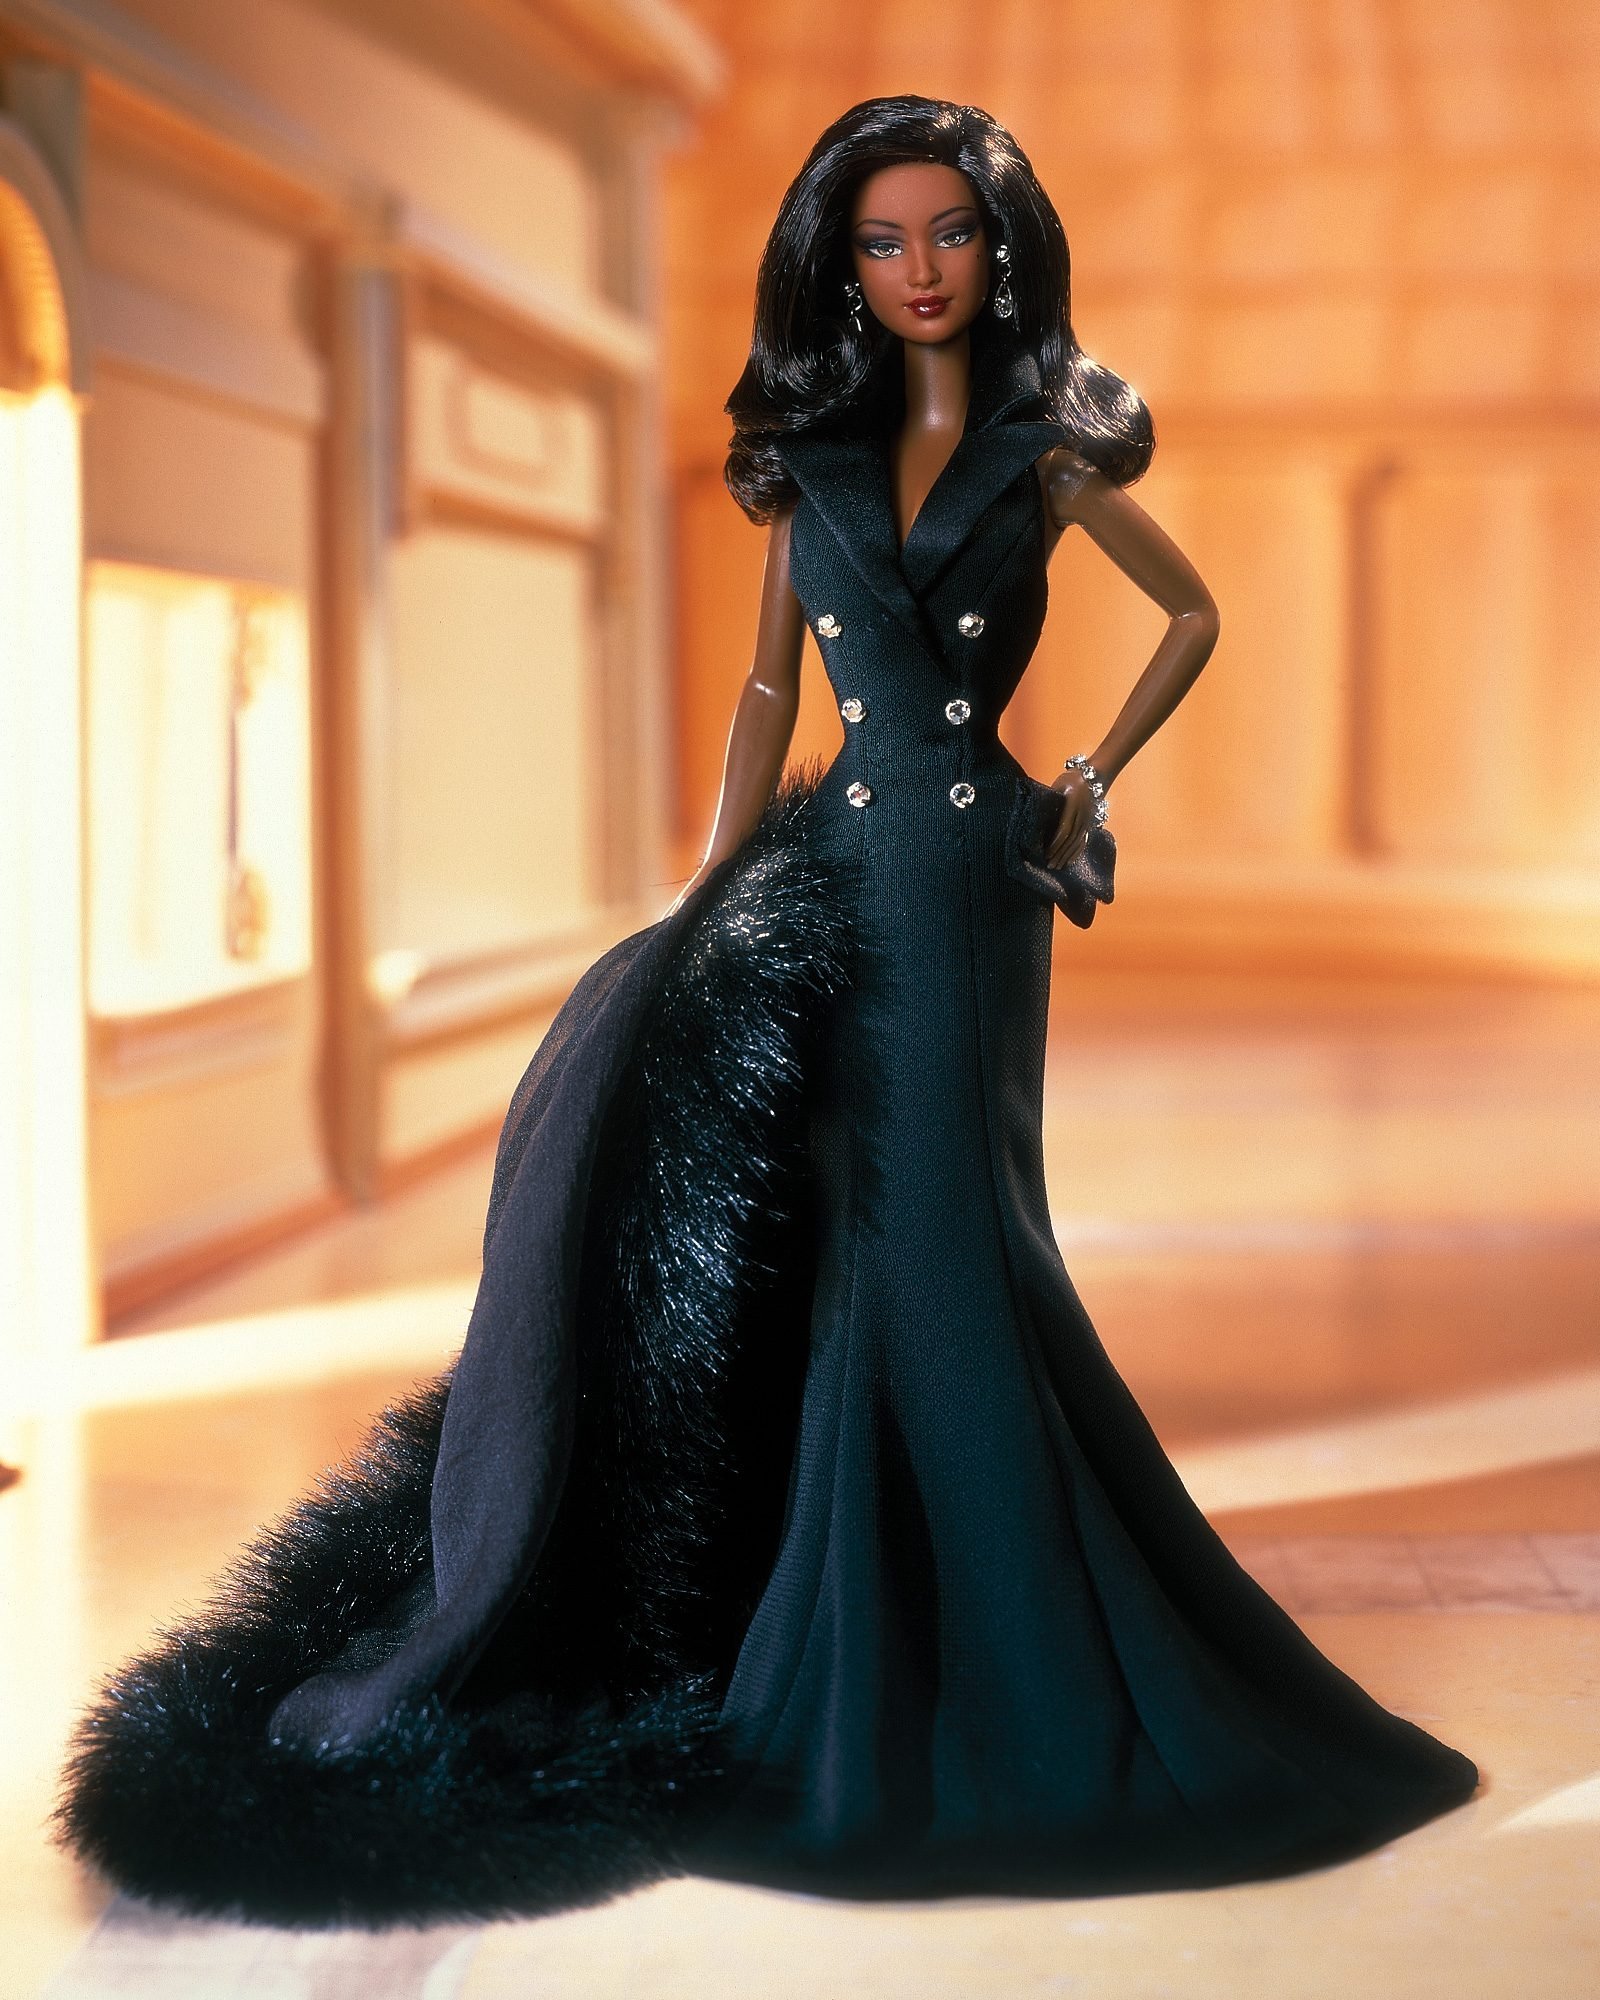 most expensive barbie doll